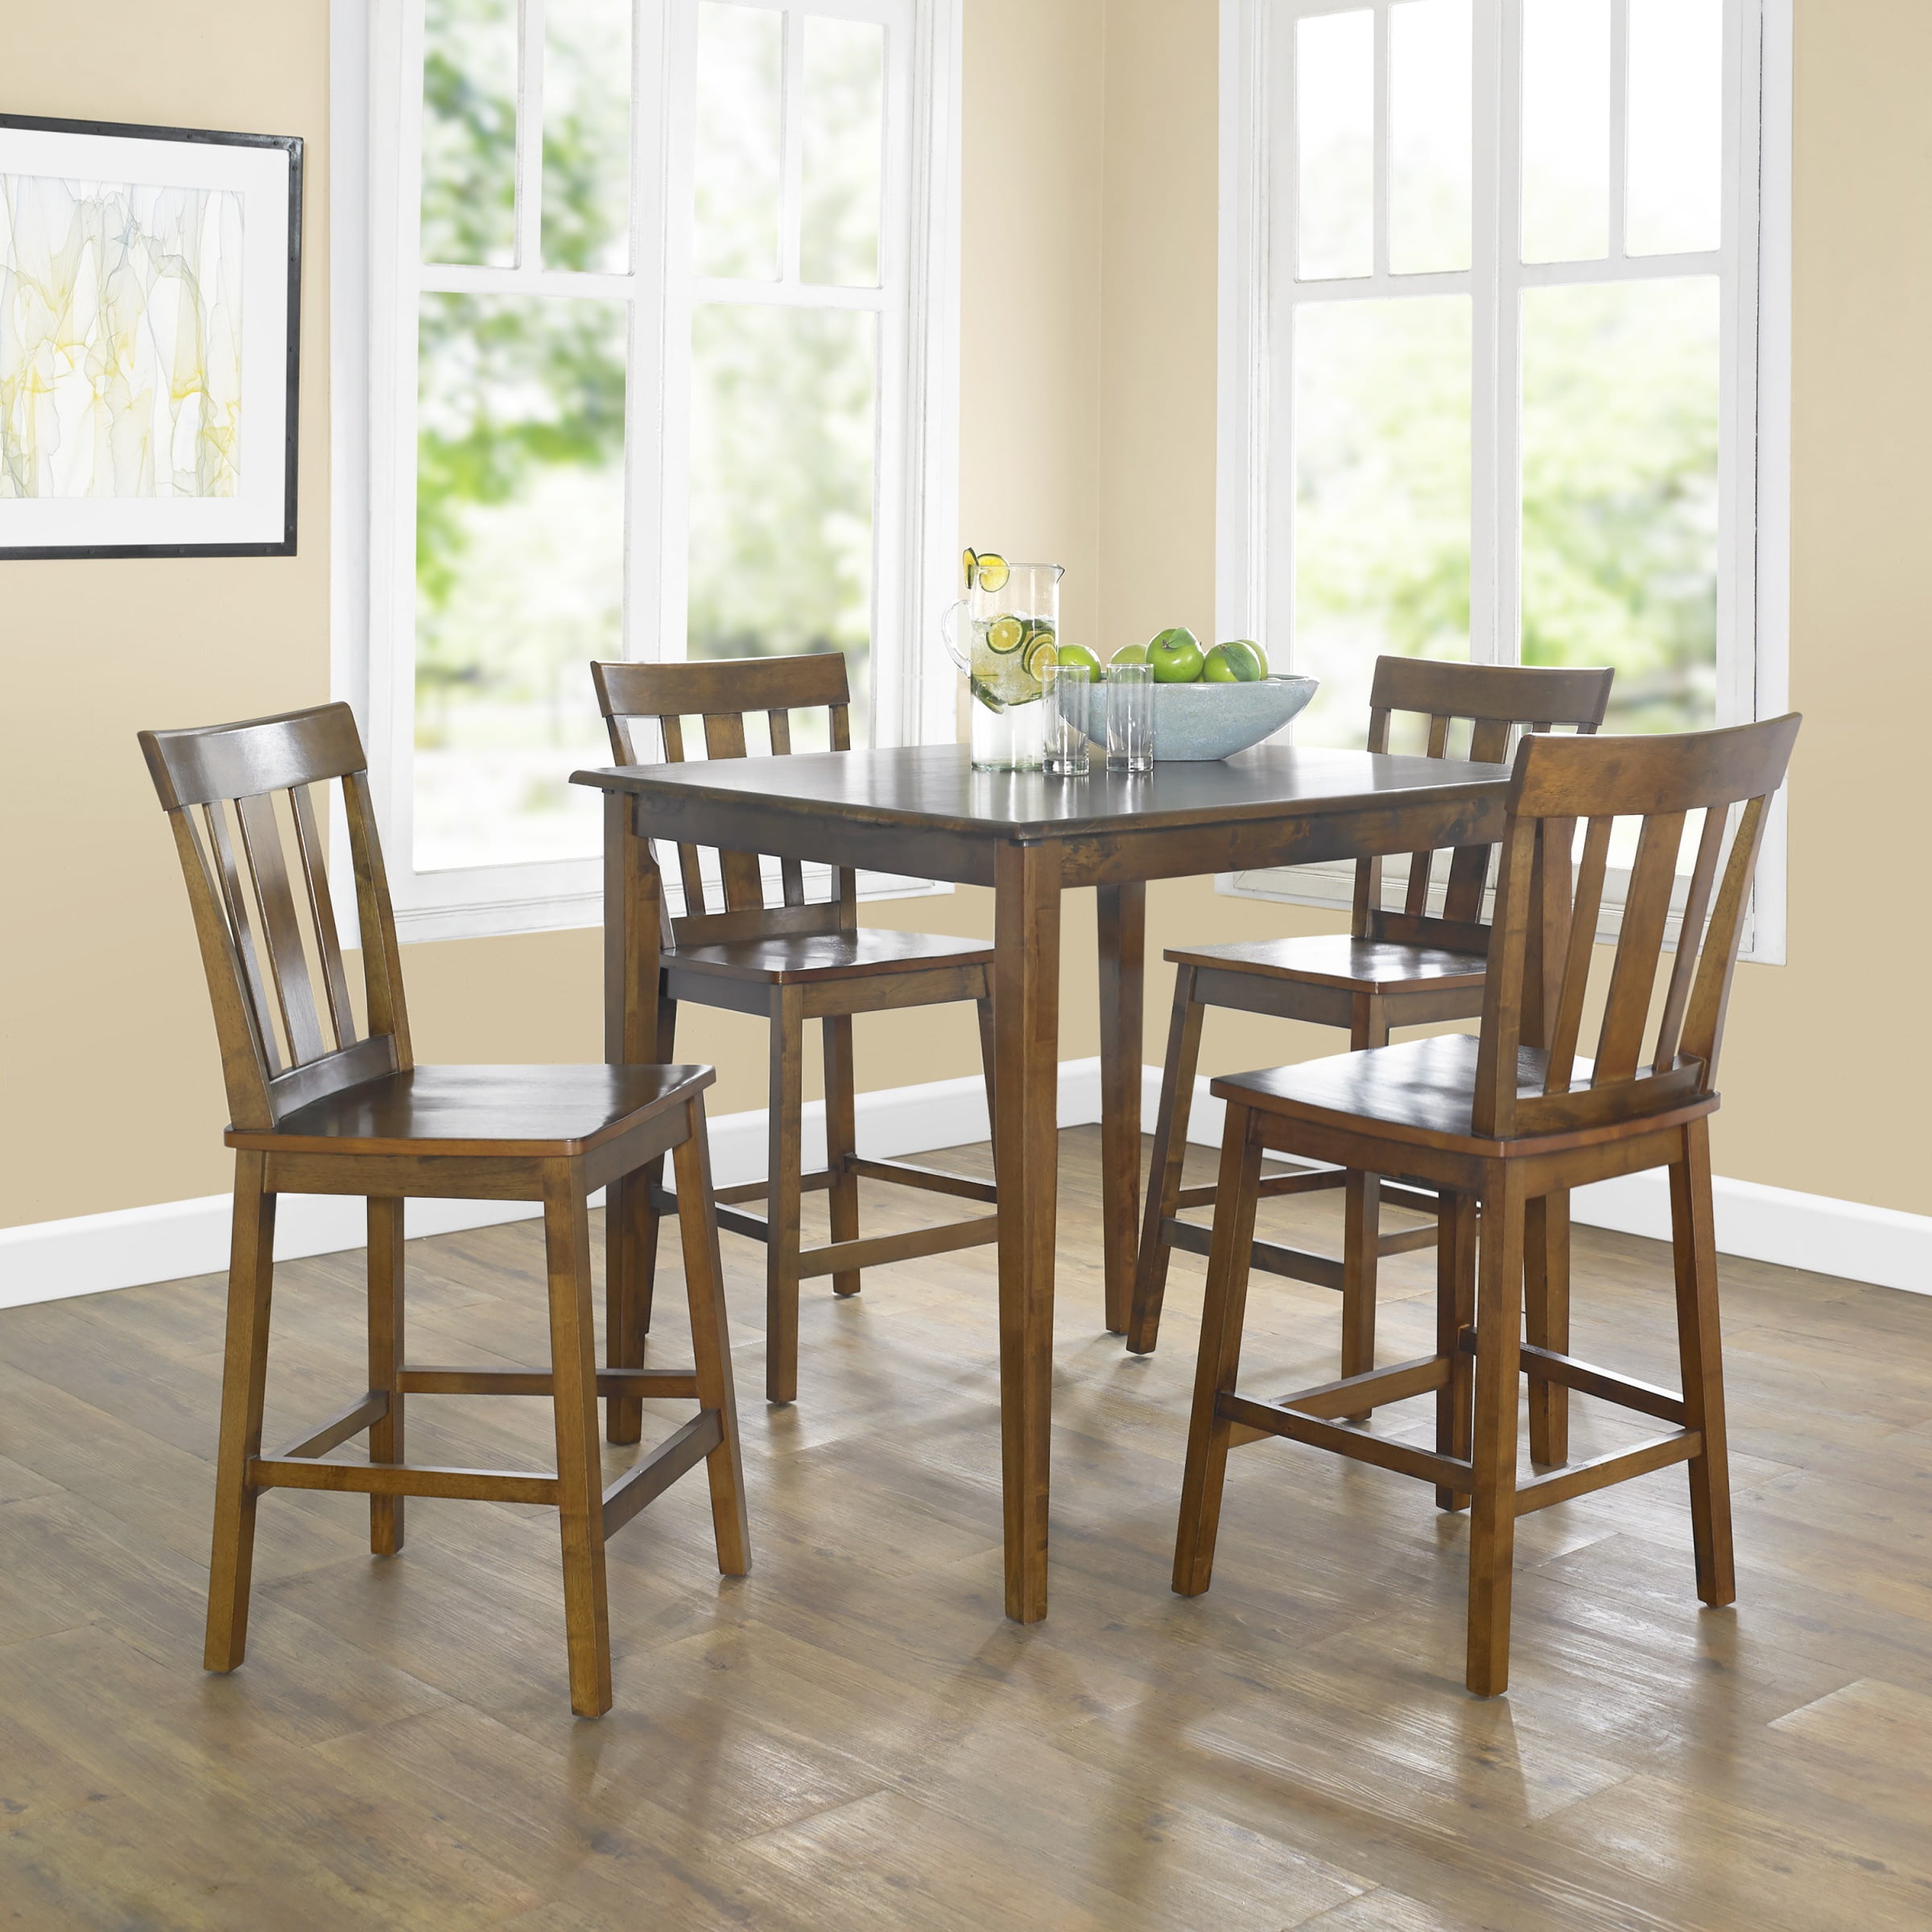 Mainstays 5 Piece Mission Counter, Counter Height Oak Table And Chairs